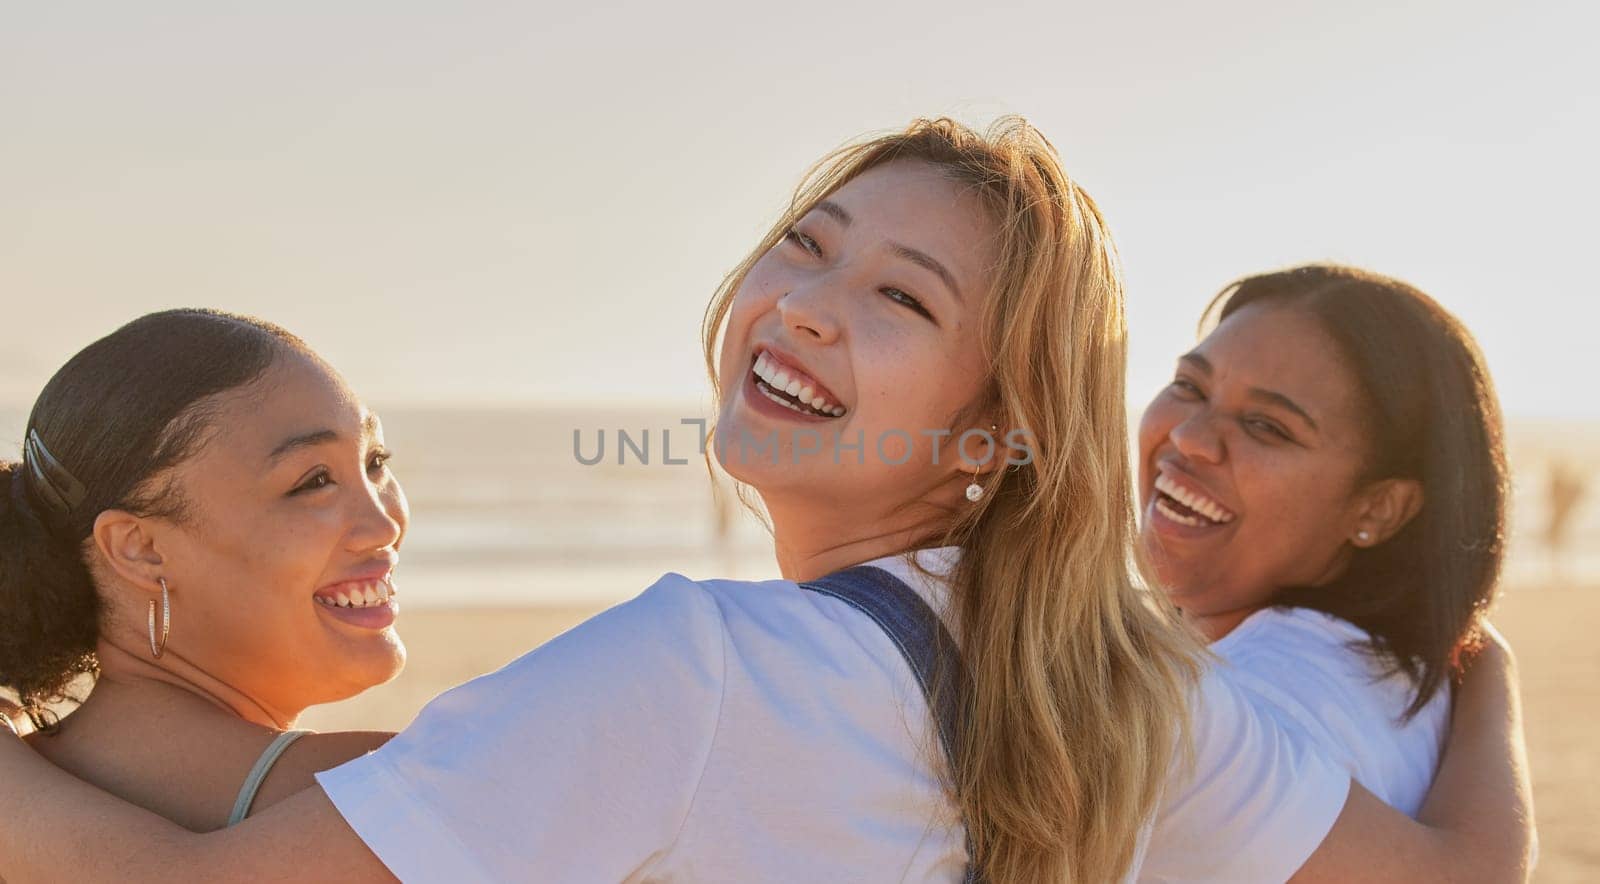 Portrait, hug and women friends at beach for vacation, holiday or summer trip. Back view, smile and happy people enjoying quality time outdoors, having fun and bonding together by sea or ocean shore